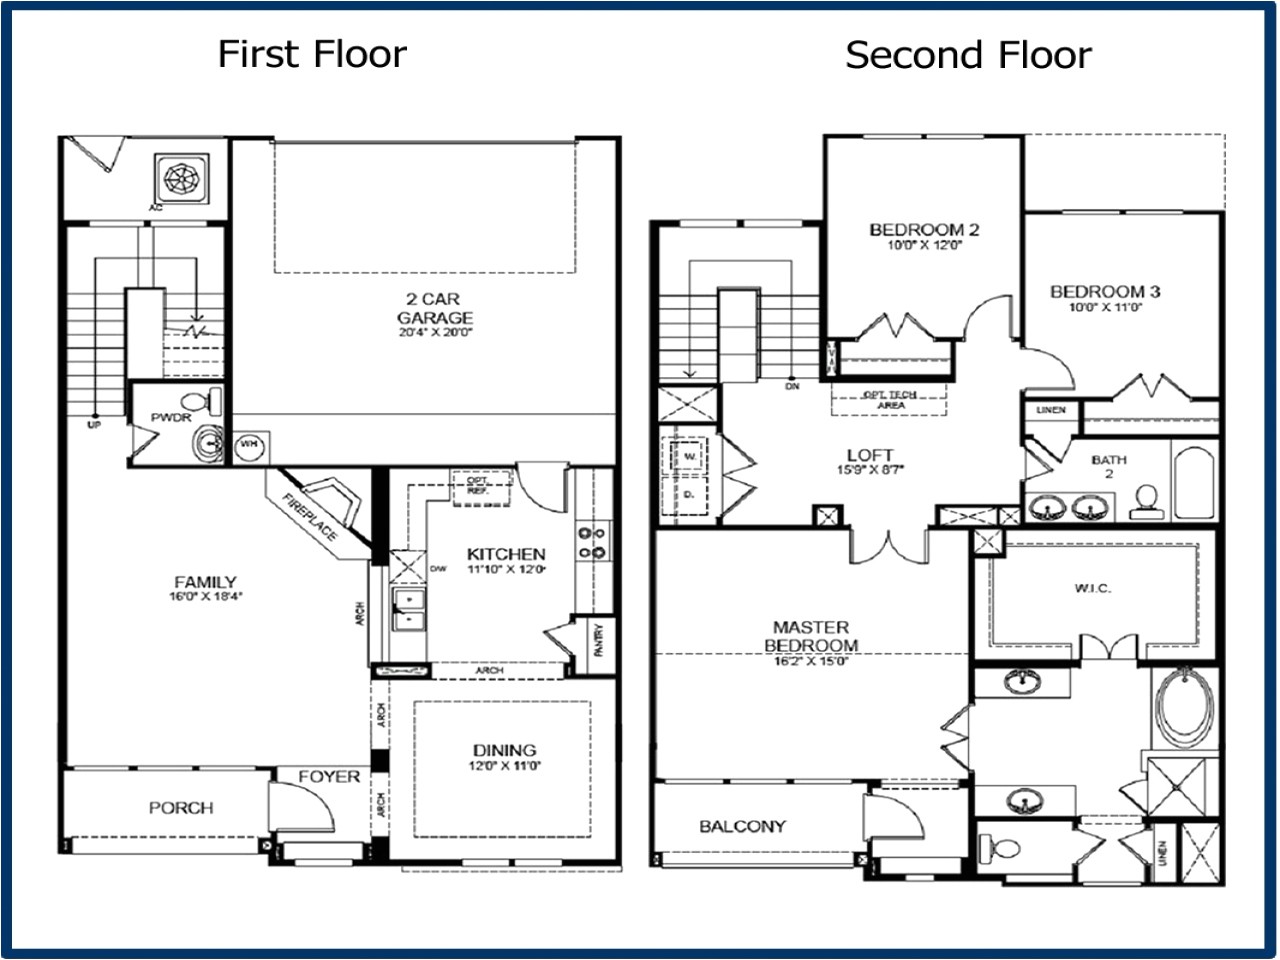 1 story house plans with loft new 2 story master bedroom 2 story 3 bedroom floor plans 2